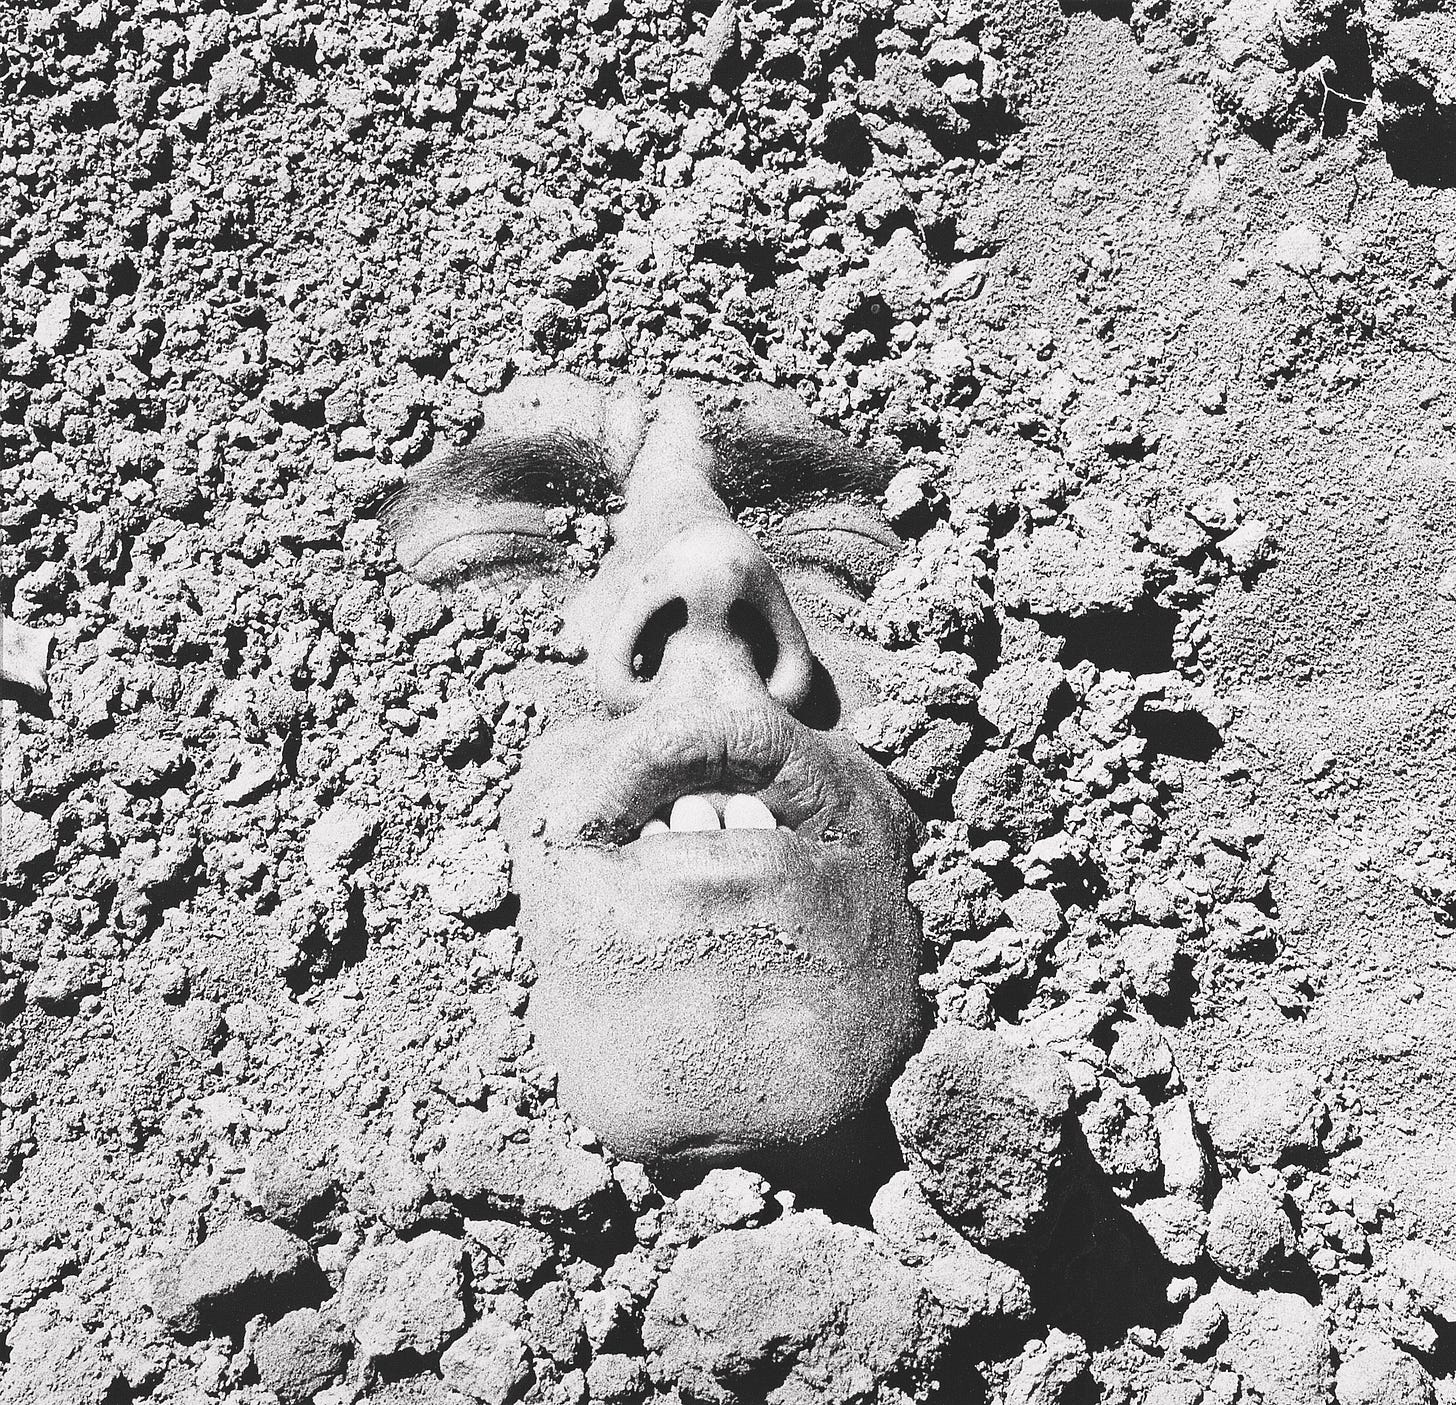 The artist's face is submerged in dirt in a grave.